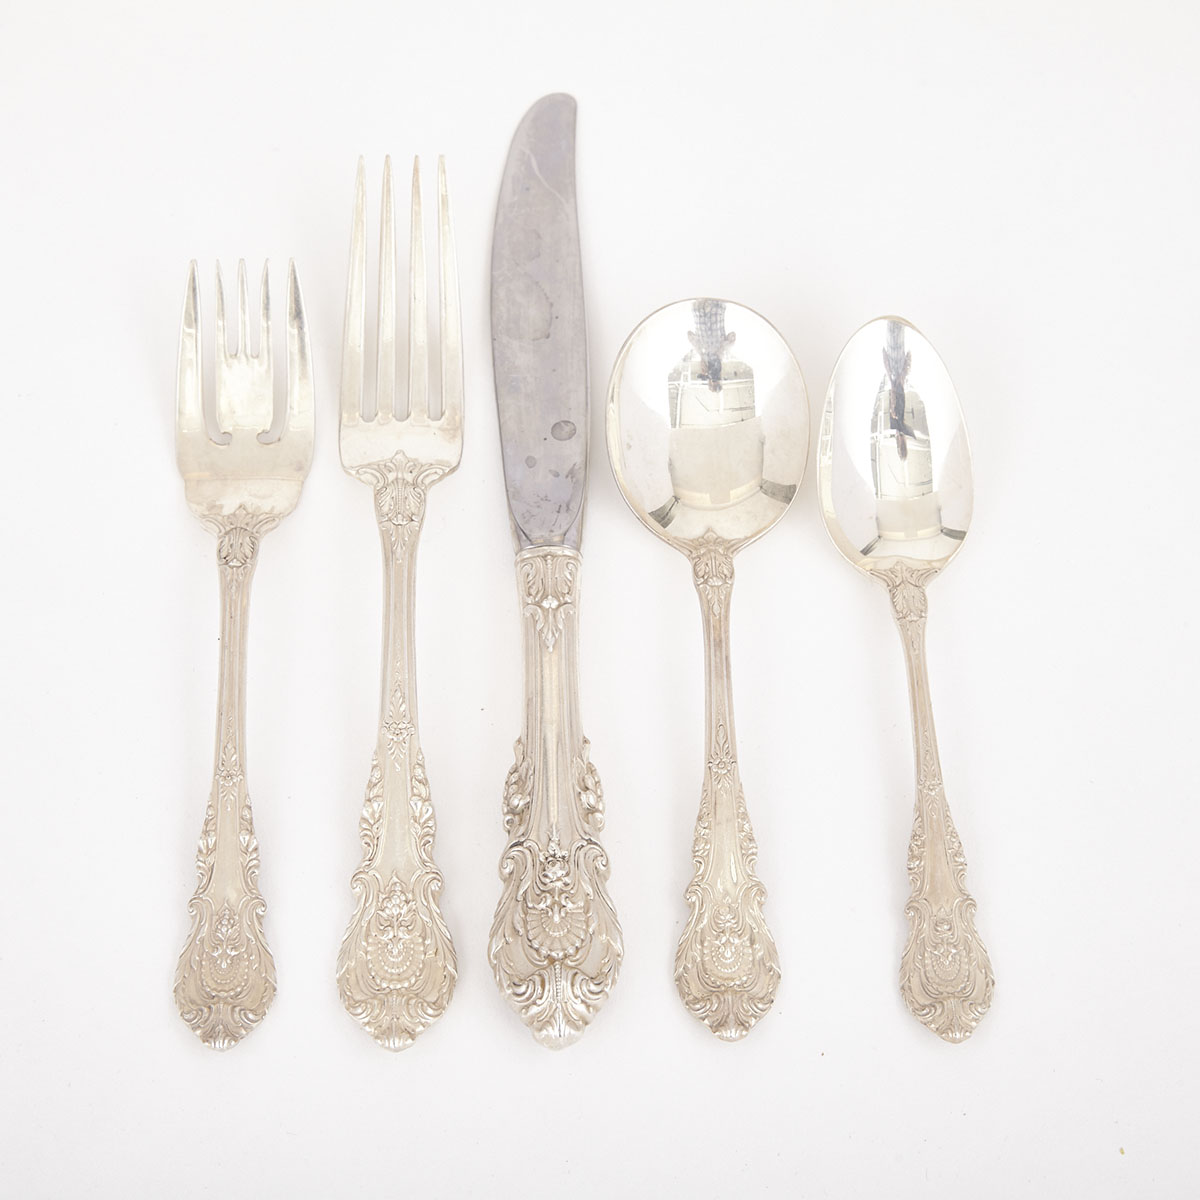 American Silver ‘Sir Christopher’ Pattern Flatware Service, Wallace Silversmiths, Wallingford, Ct., 20th century